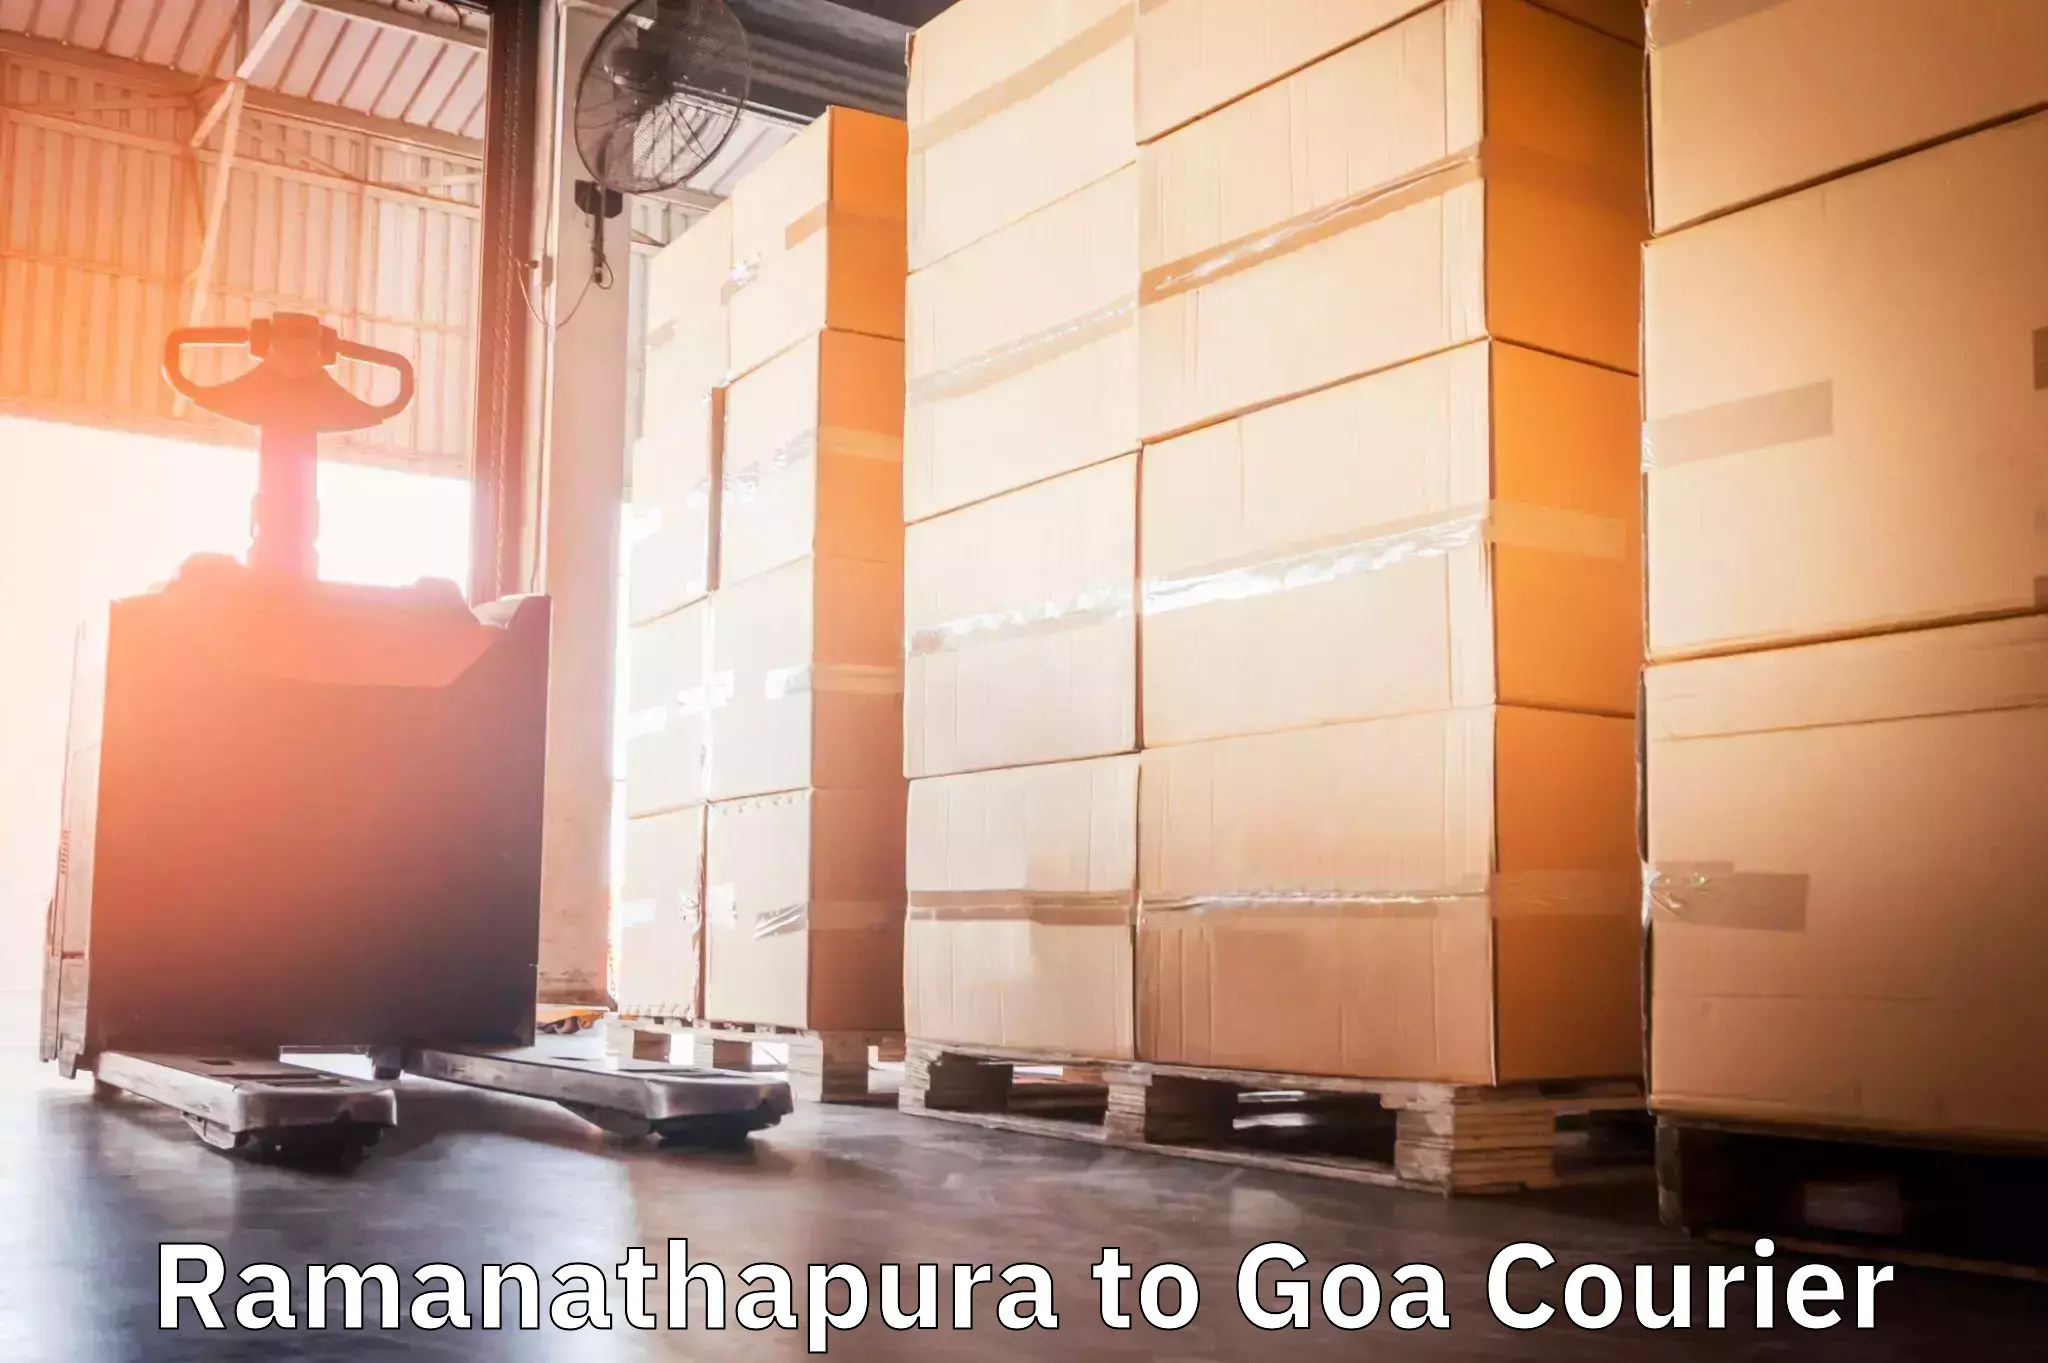 Streamlined delivery processes Ramanathapura to Goa